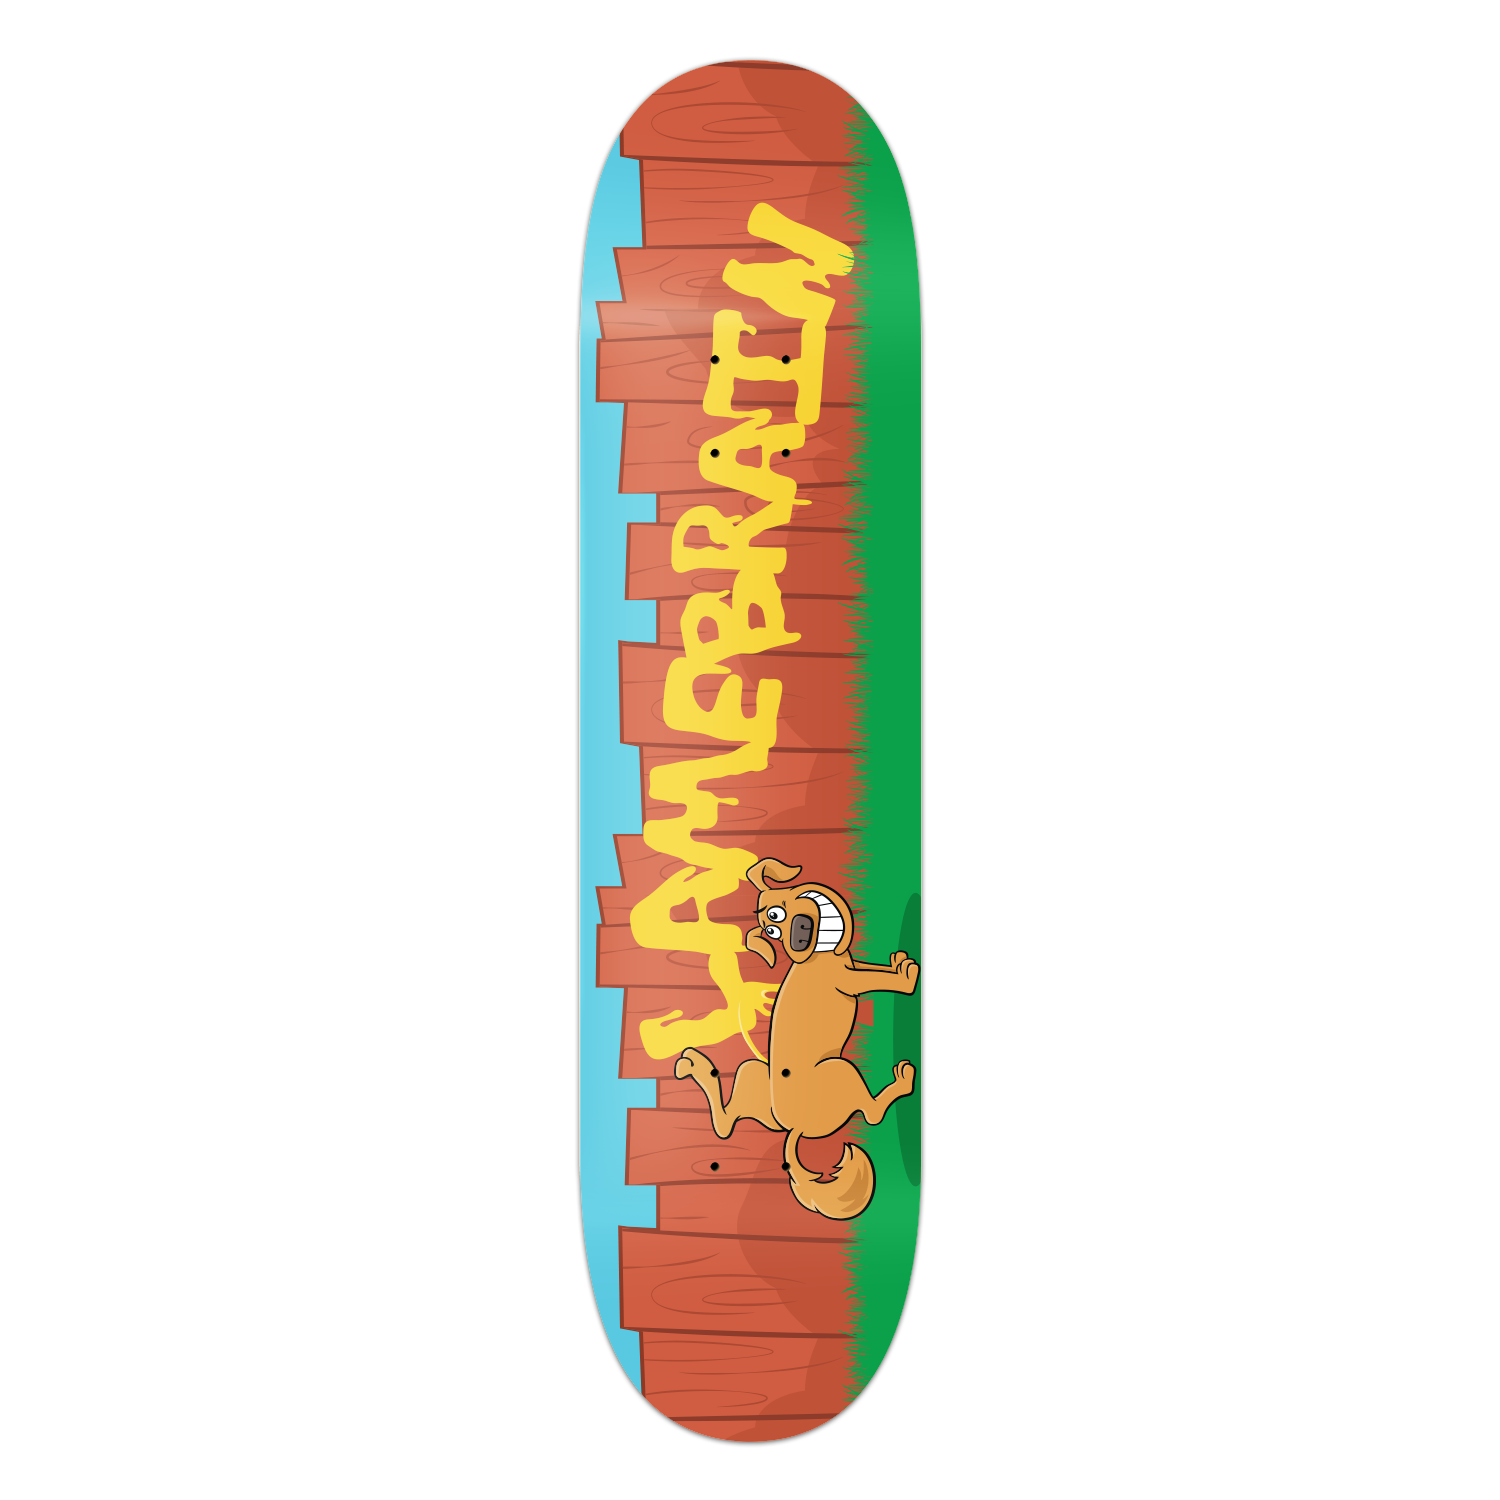 skateboard with cartoon picture of dog peeing on a fence that writing of the peeing says lamebrain